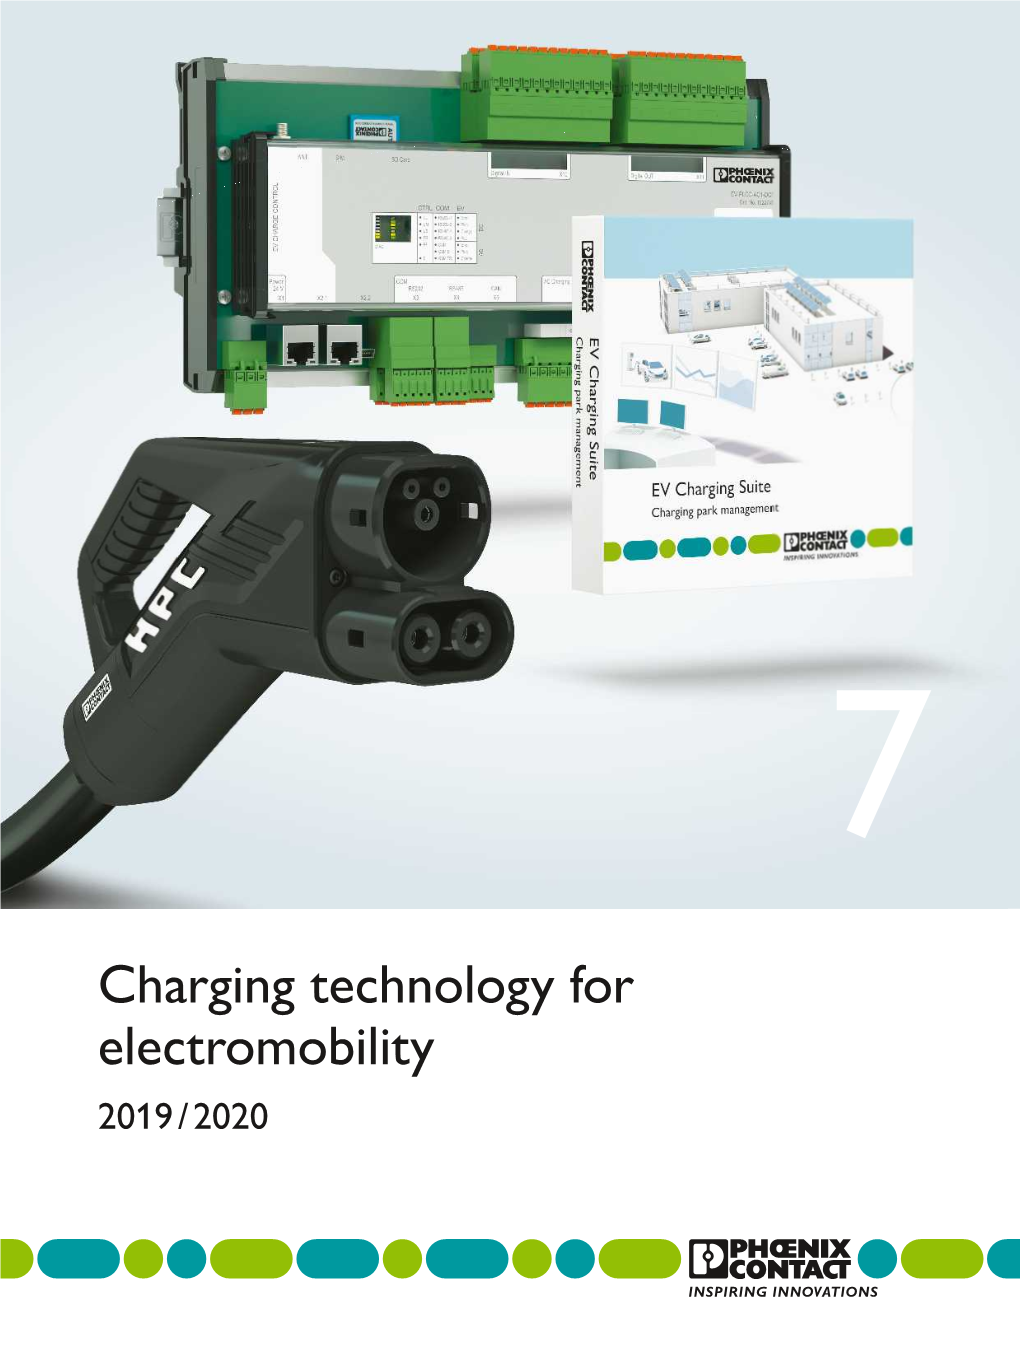 Charging Technology for Electromobility